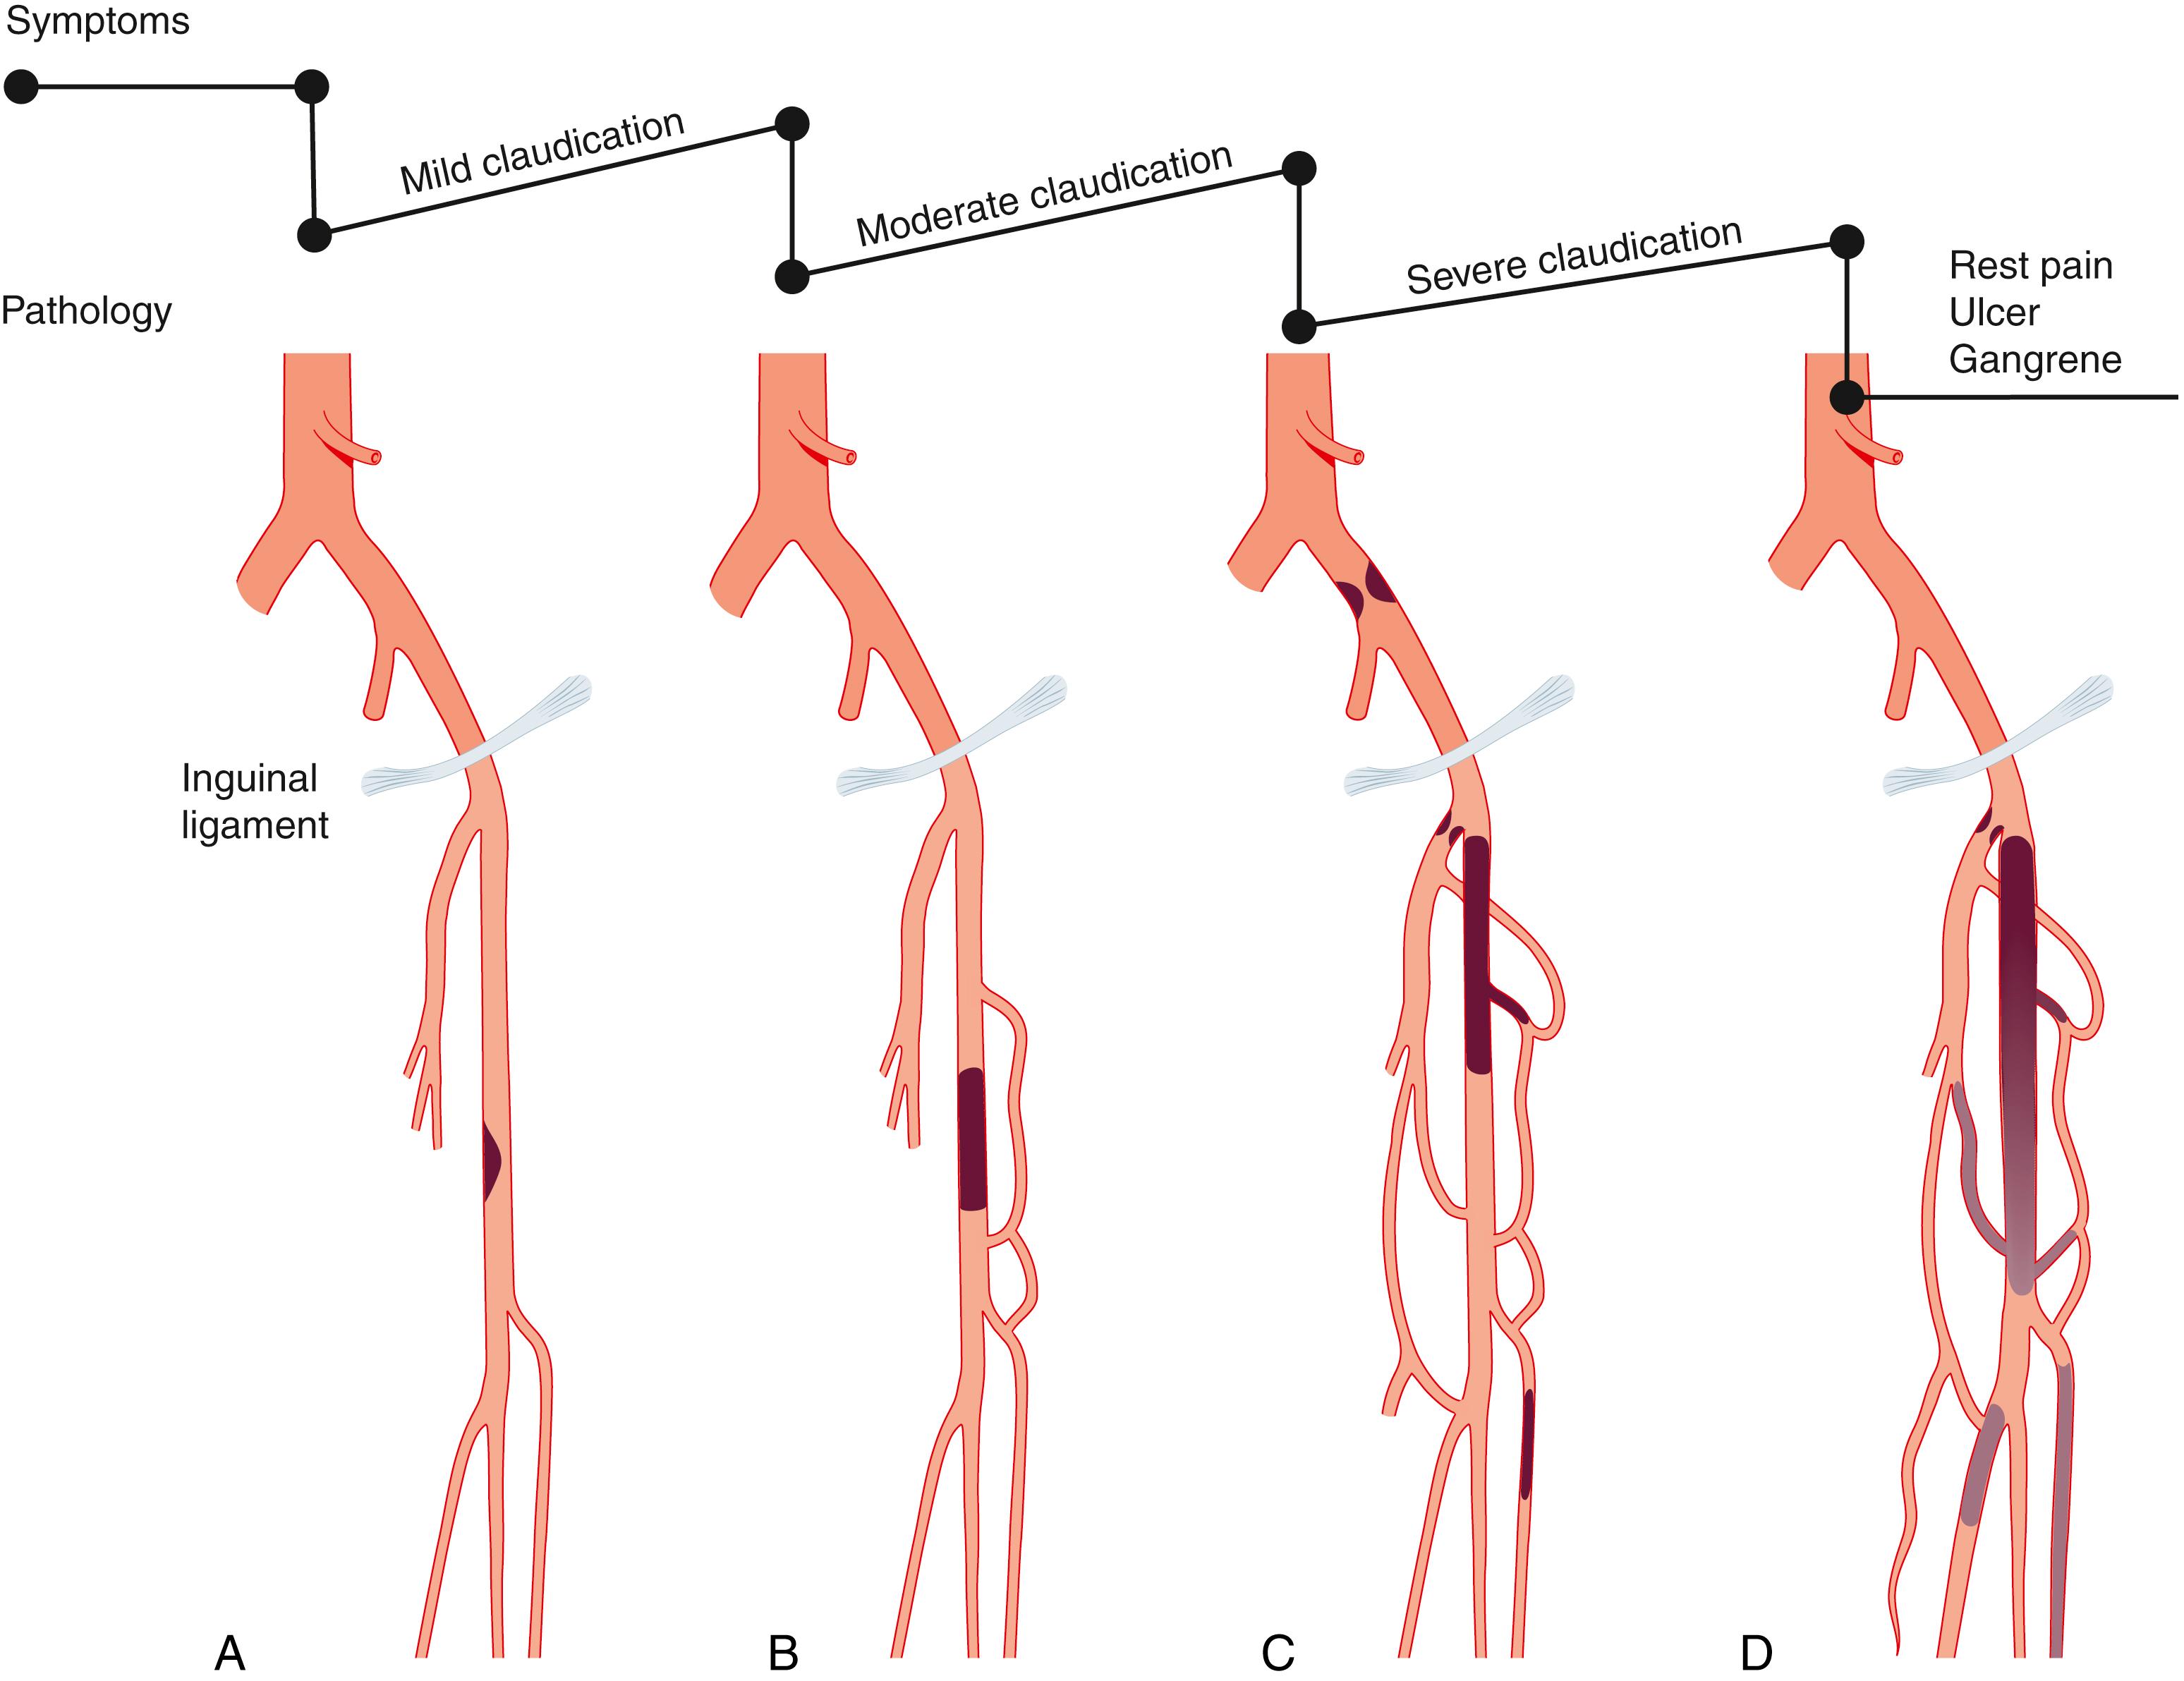 Fig. 22.6, Symptoms and pathology in intermittent claudication. (A) Superficial femoral artery (SFA) stenosis at adductor canal. (B) Occlusion of the SFA and development of a collateral circulation between the deep femoral (profunda femoris) artery (PFA) and the popliteal artery. (C) Iliac artery and PFA stenosis leading to worsening symptoms of intermittent claudication and further collateralisation. (D) Eventually, chronic limb threatening limb ischaemia, characterised by ischaemic rest pain and tissue loss, develops as a result of multilevel disease affecting the tibial arteries and collateral supply.